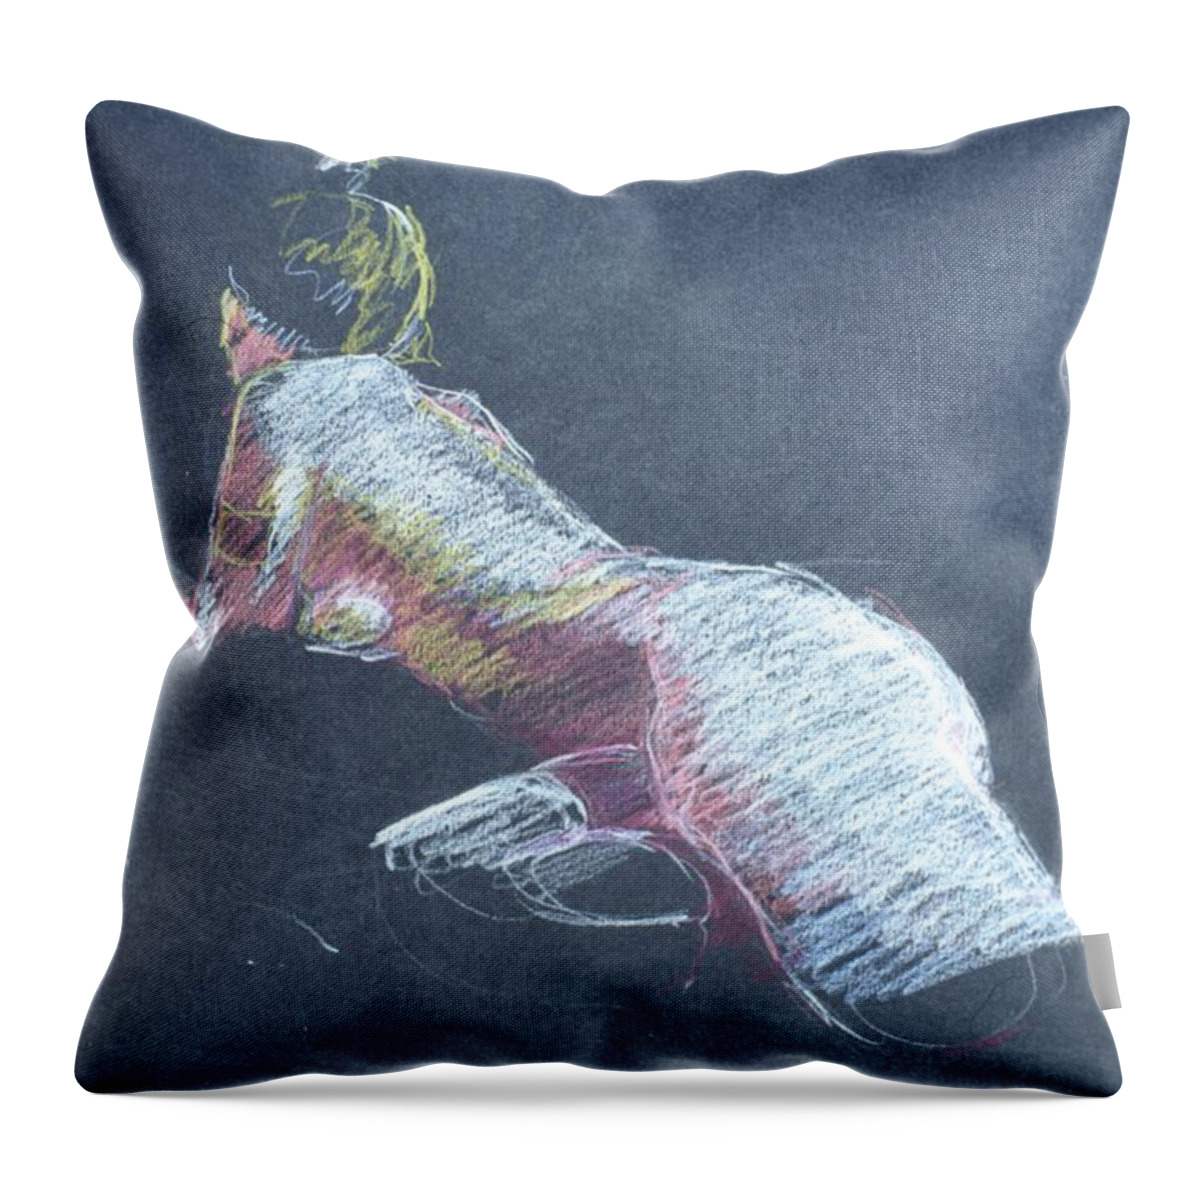 Full Body Throw Pillow featuring the painting Reclining Study 4 by Barbara Pease